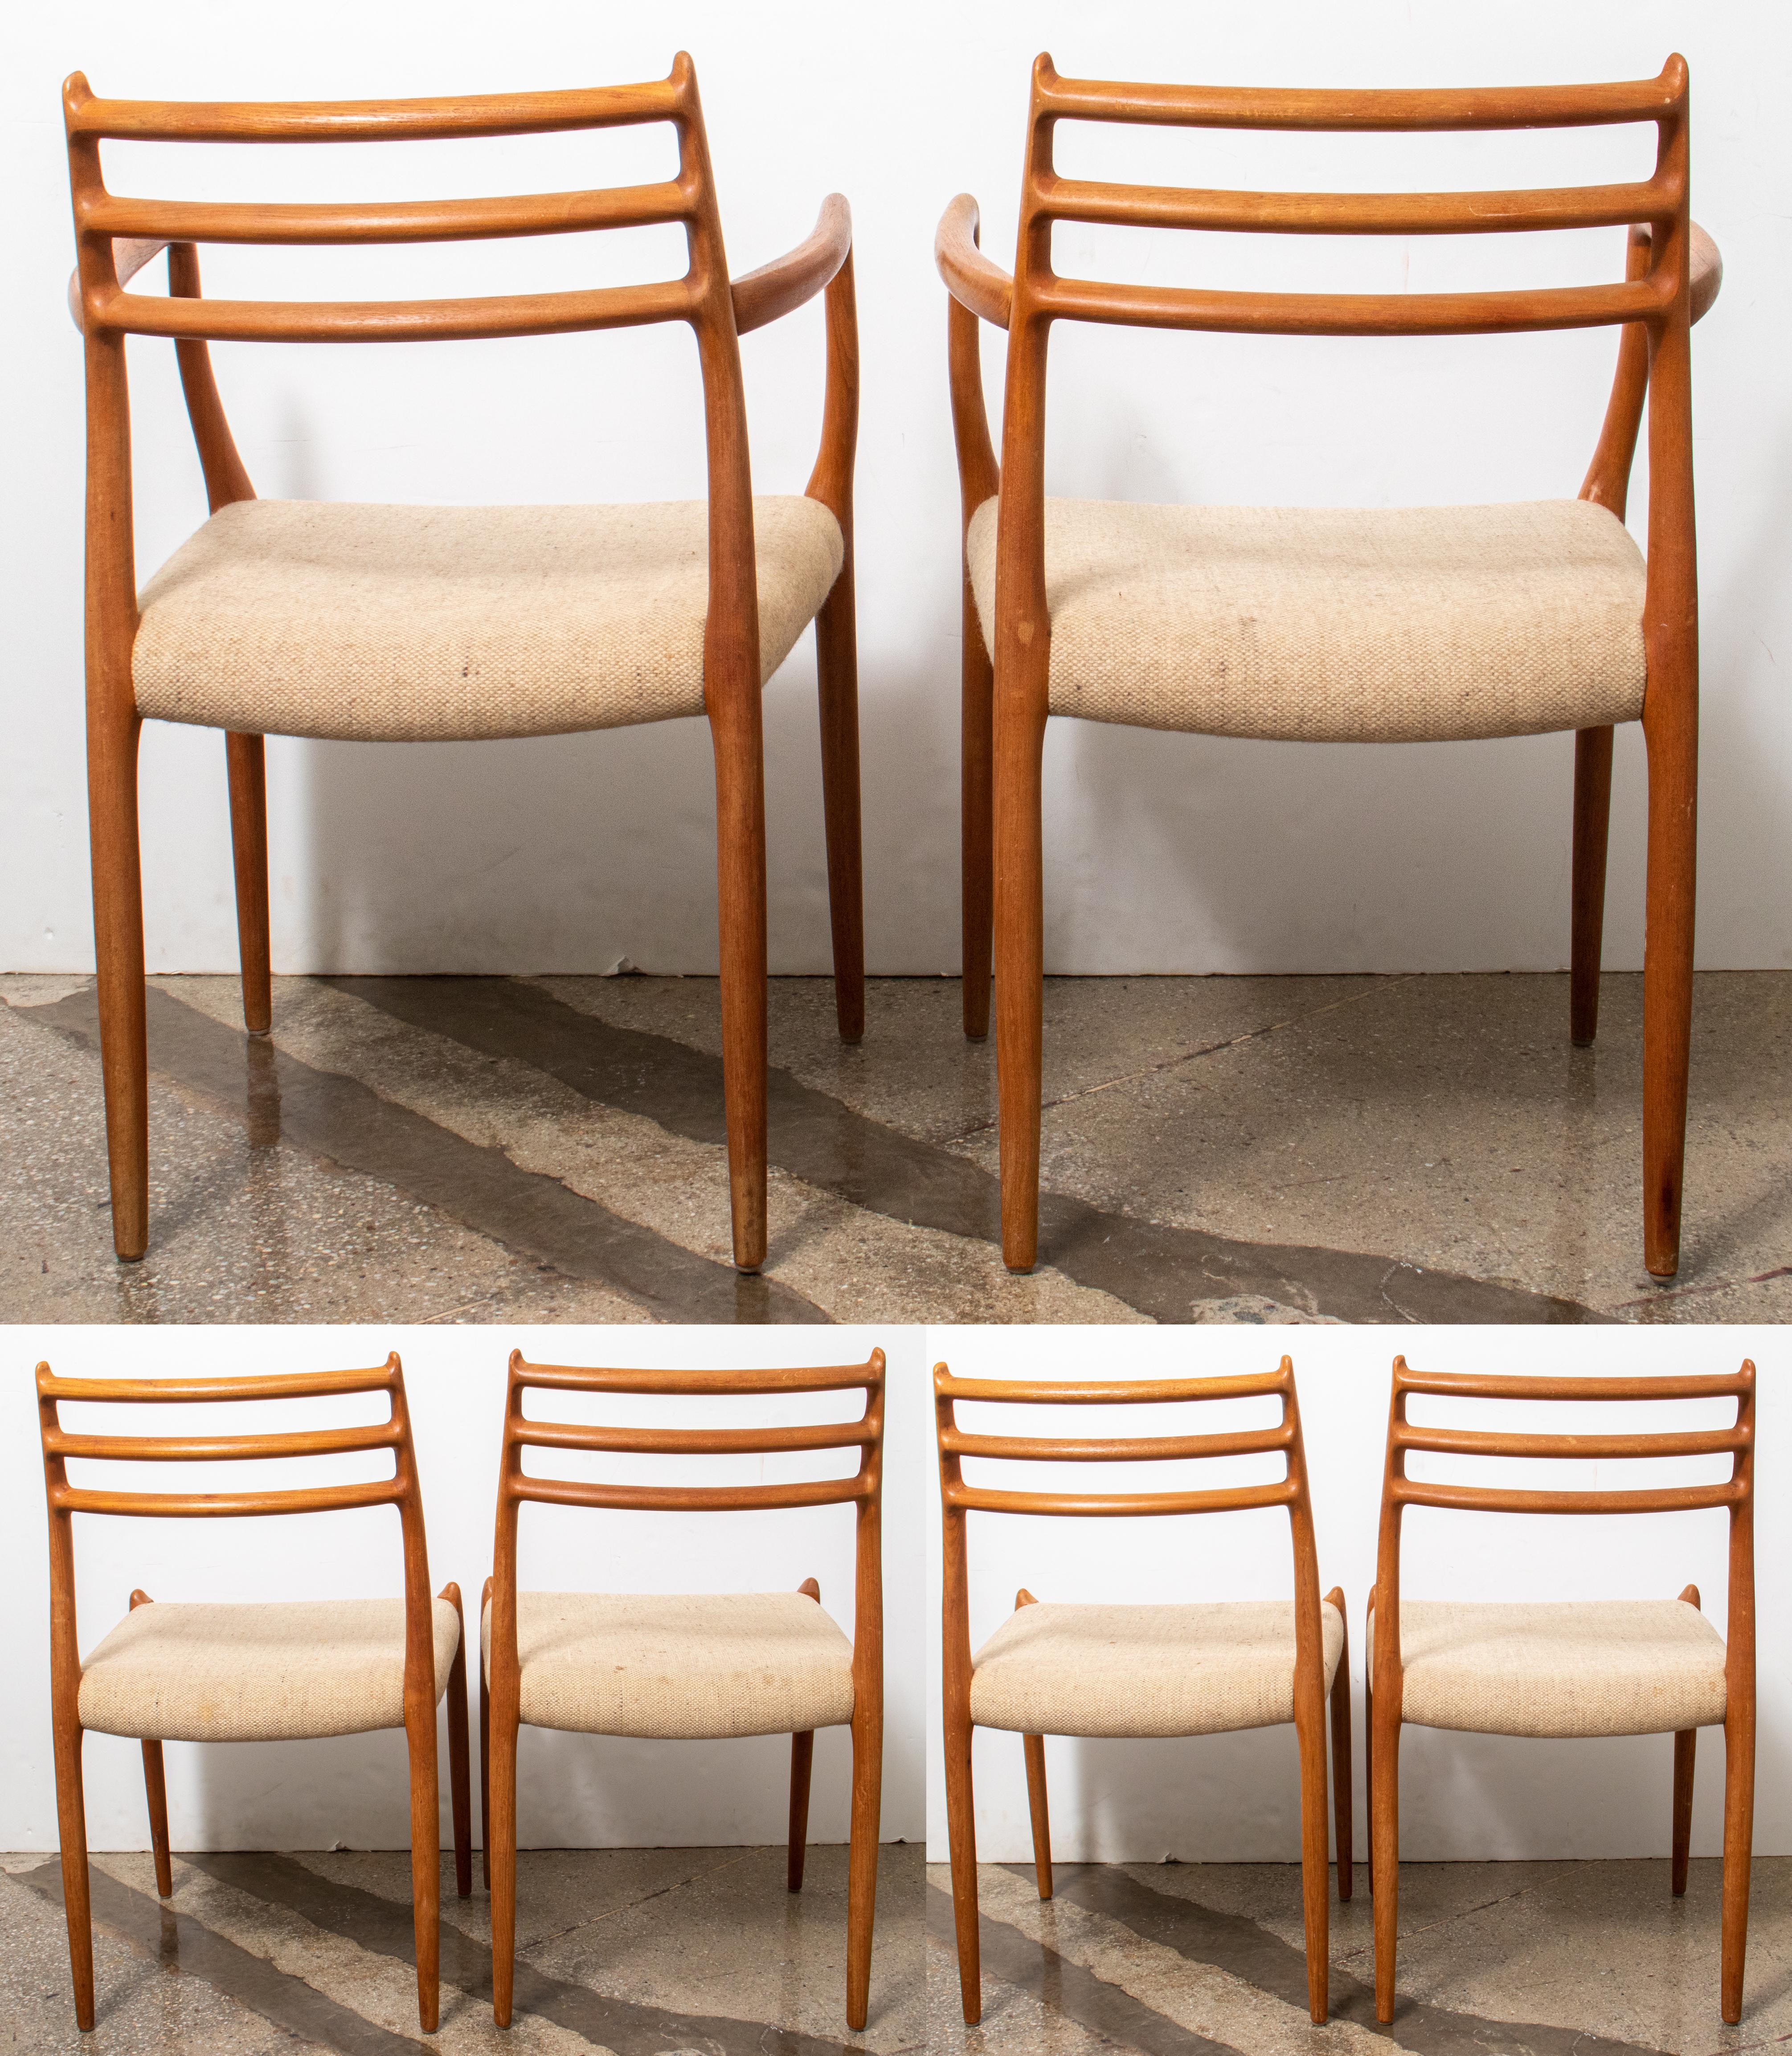 Niels Moller Danish Modern Dining Chairs, 6 1